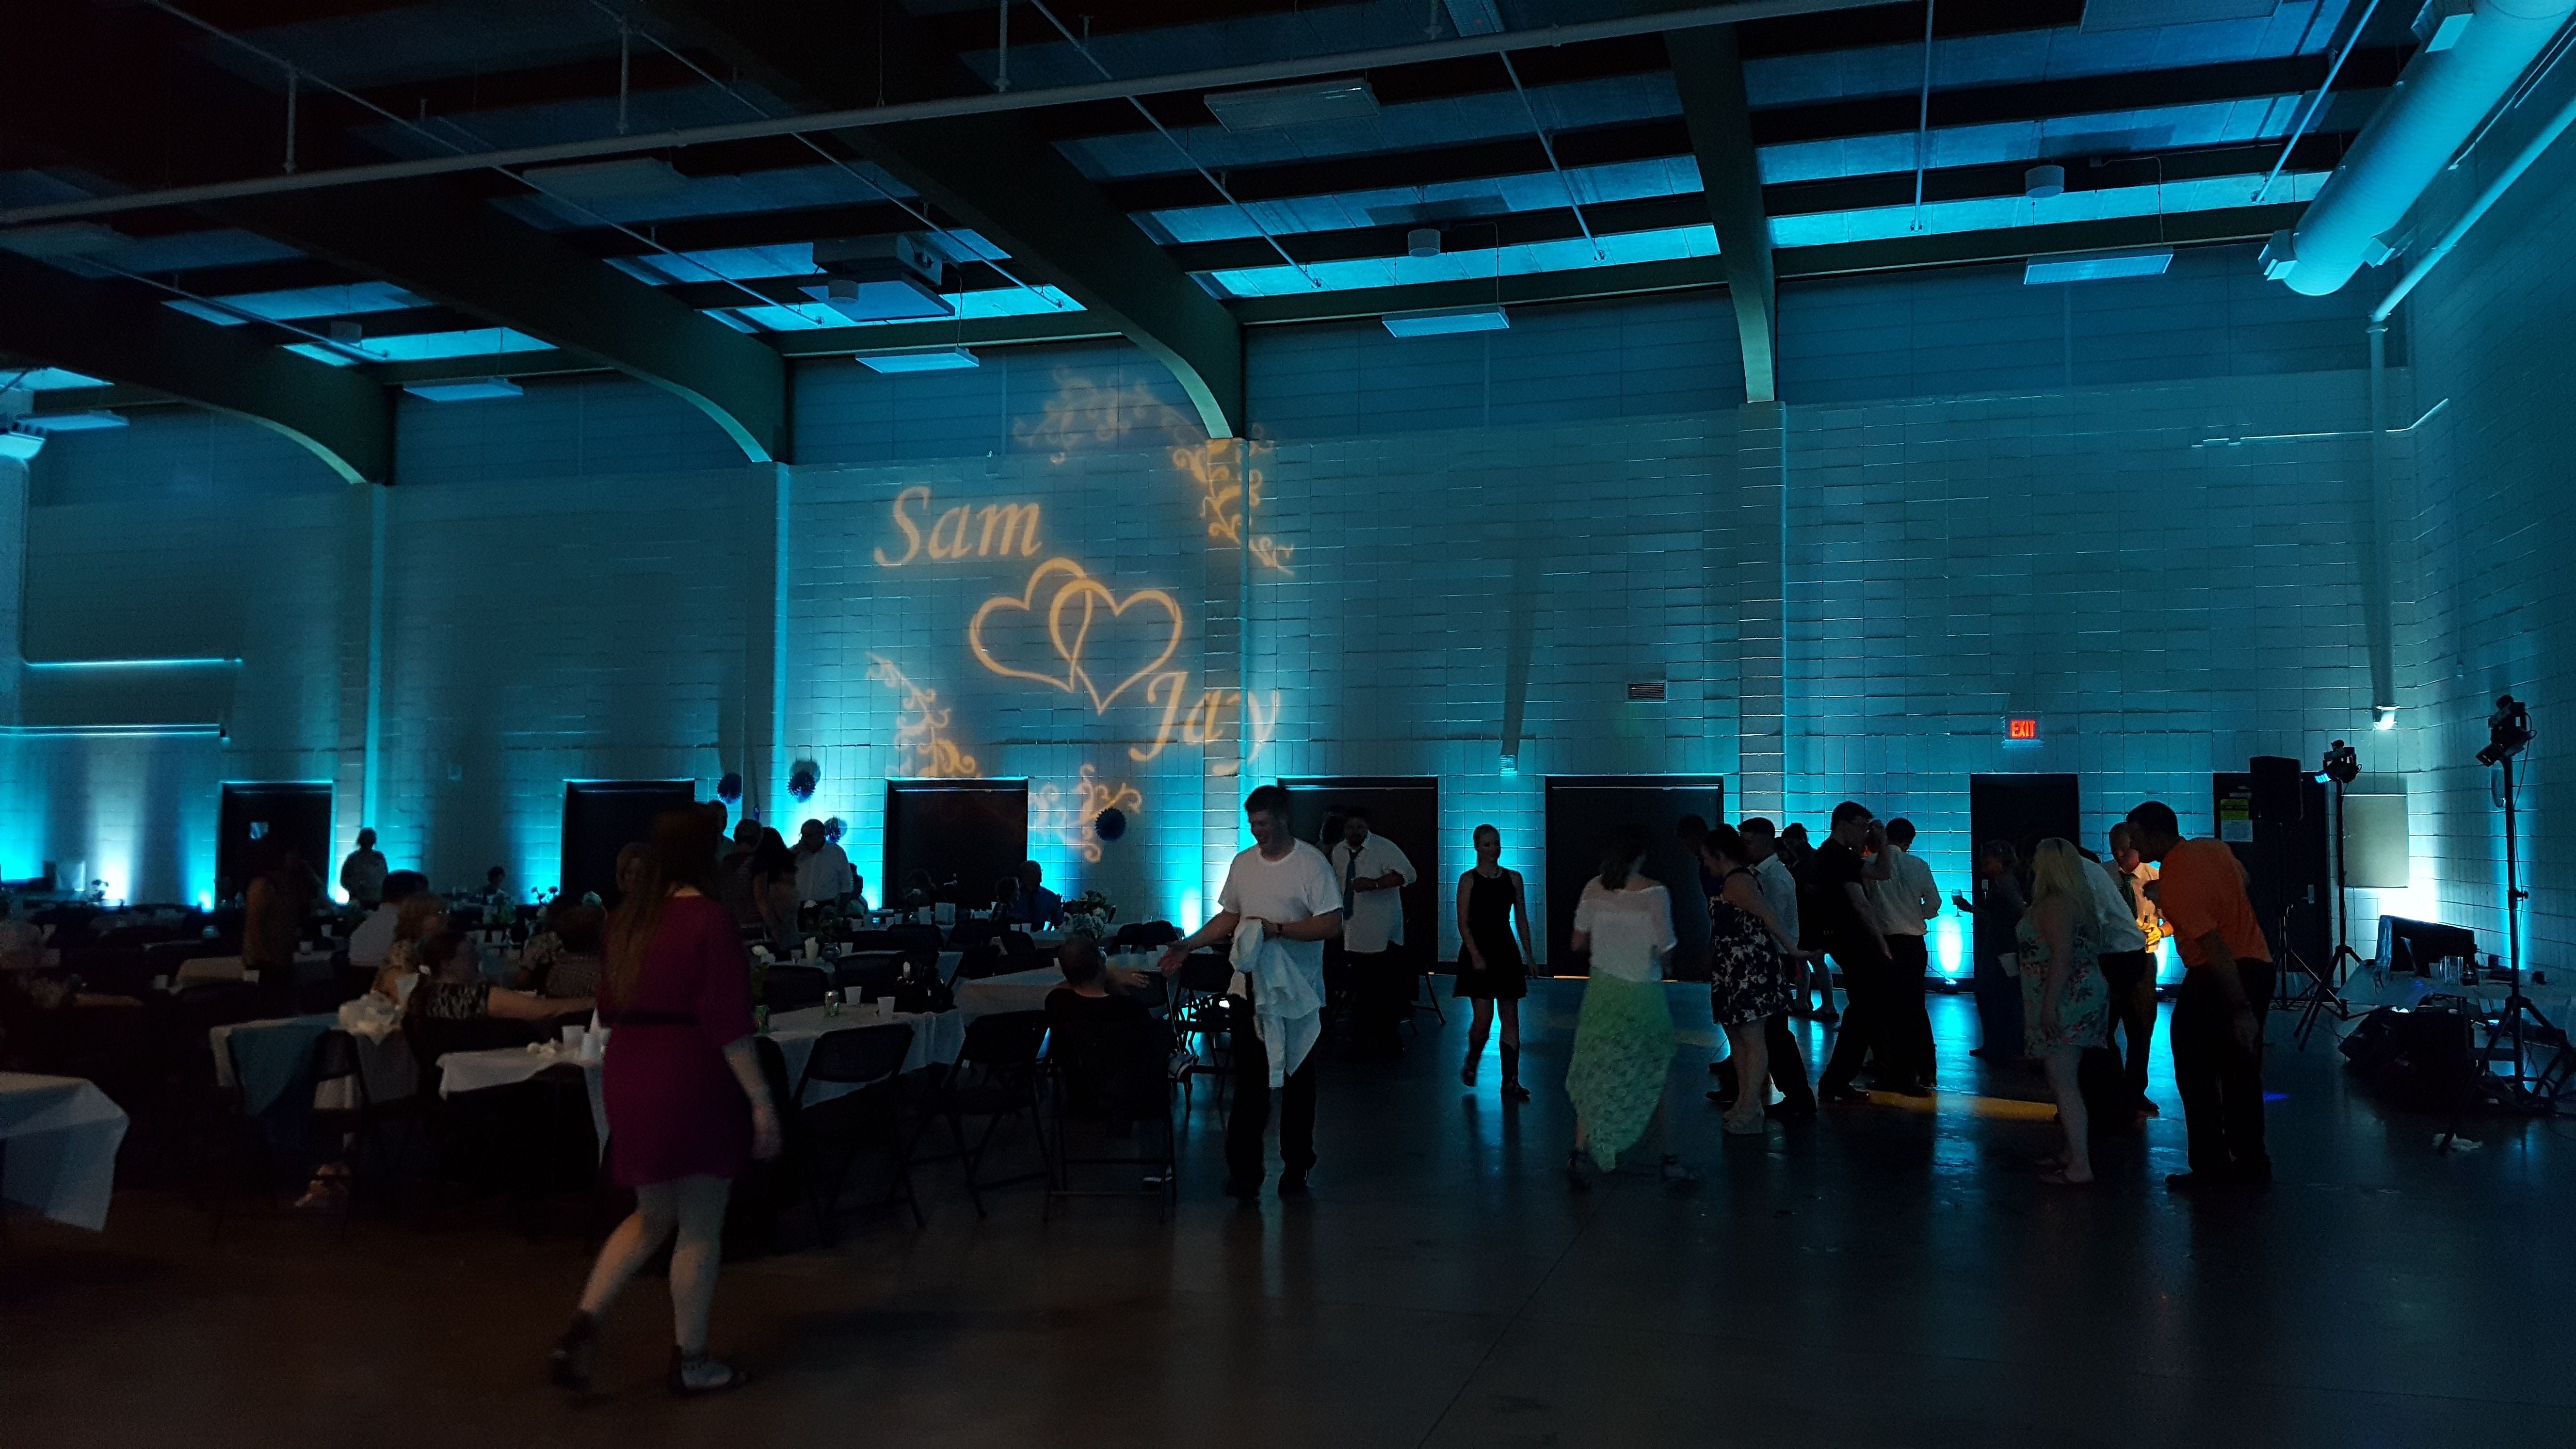 Duluth Armory wedding lighting by Duluth Event Lighting. Up lighting in teal. and a wedding monogram